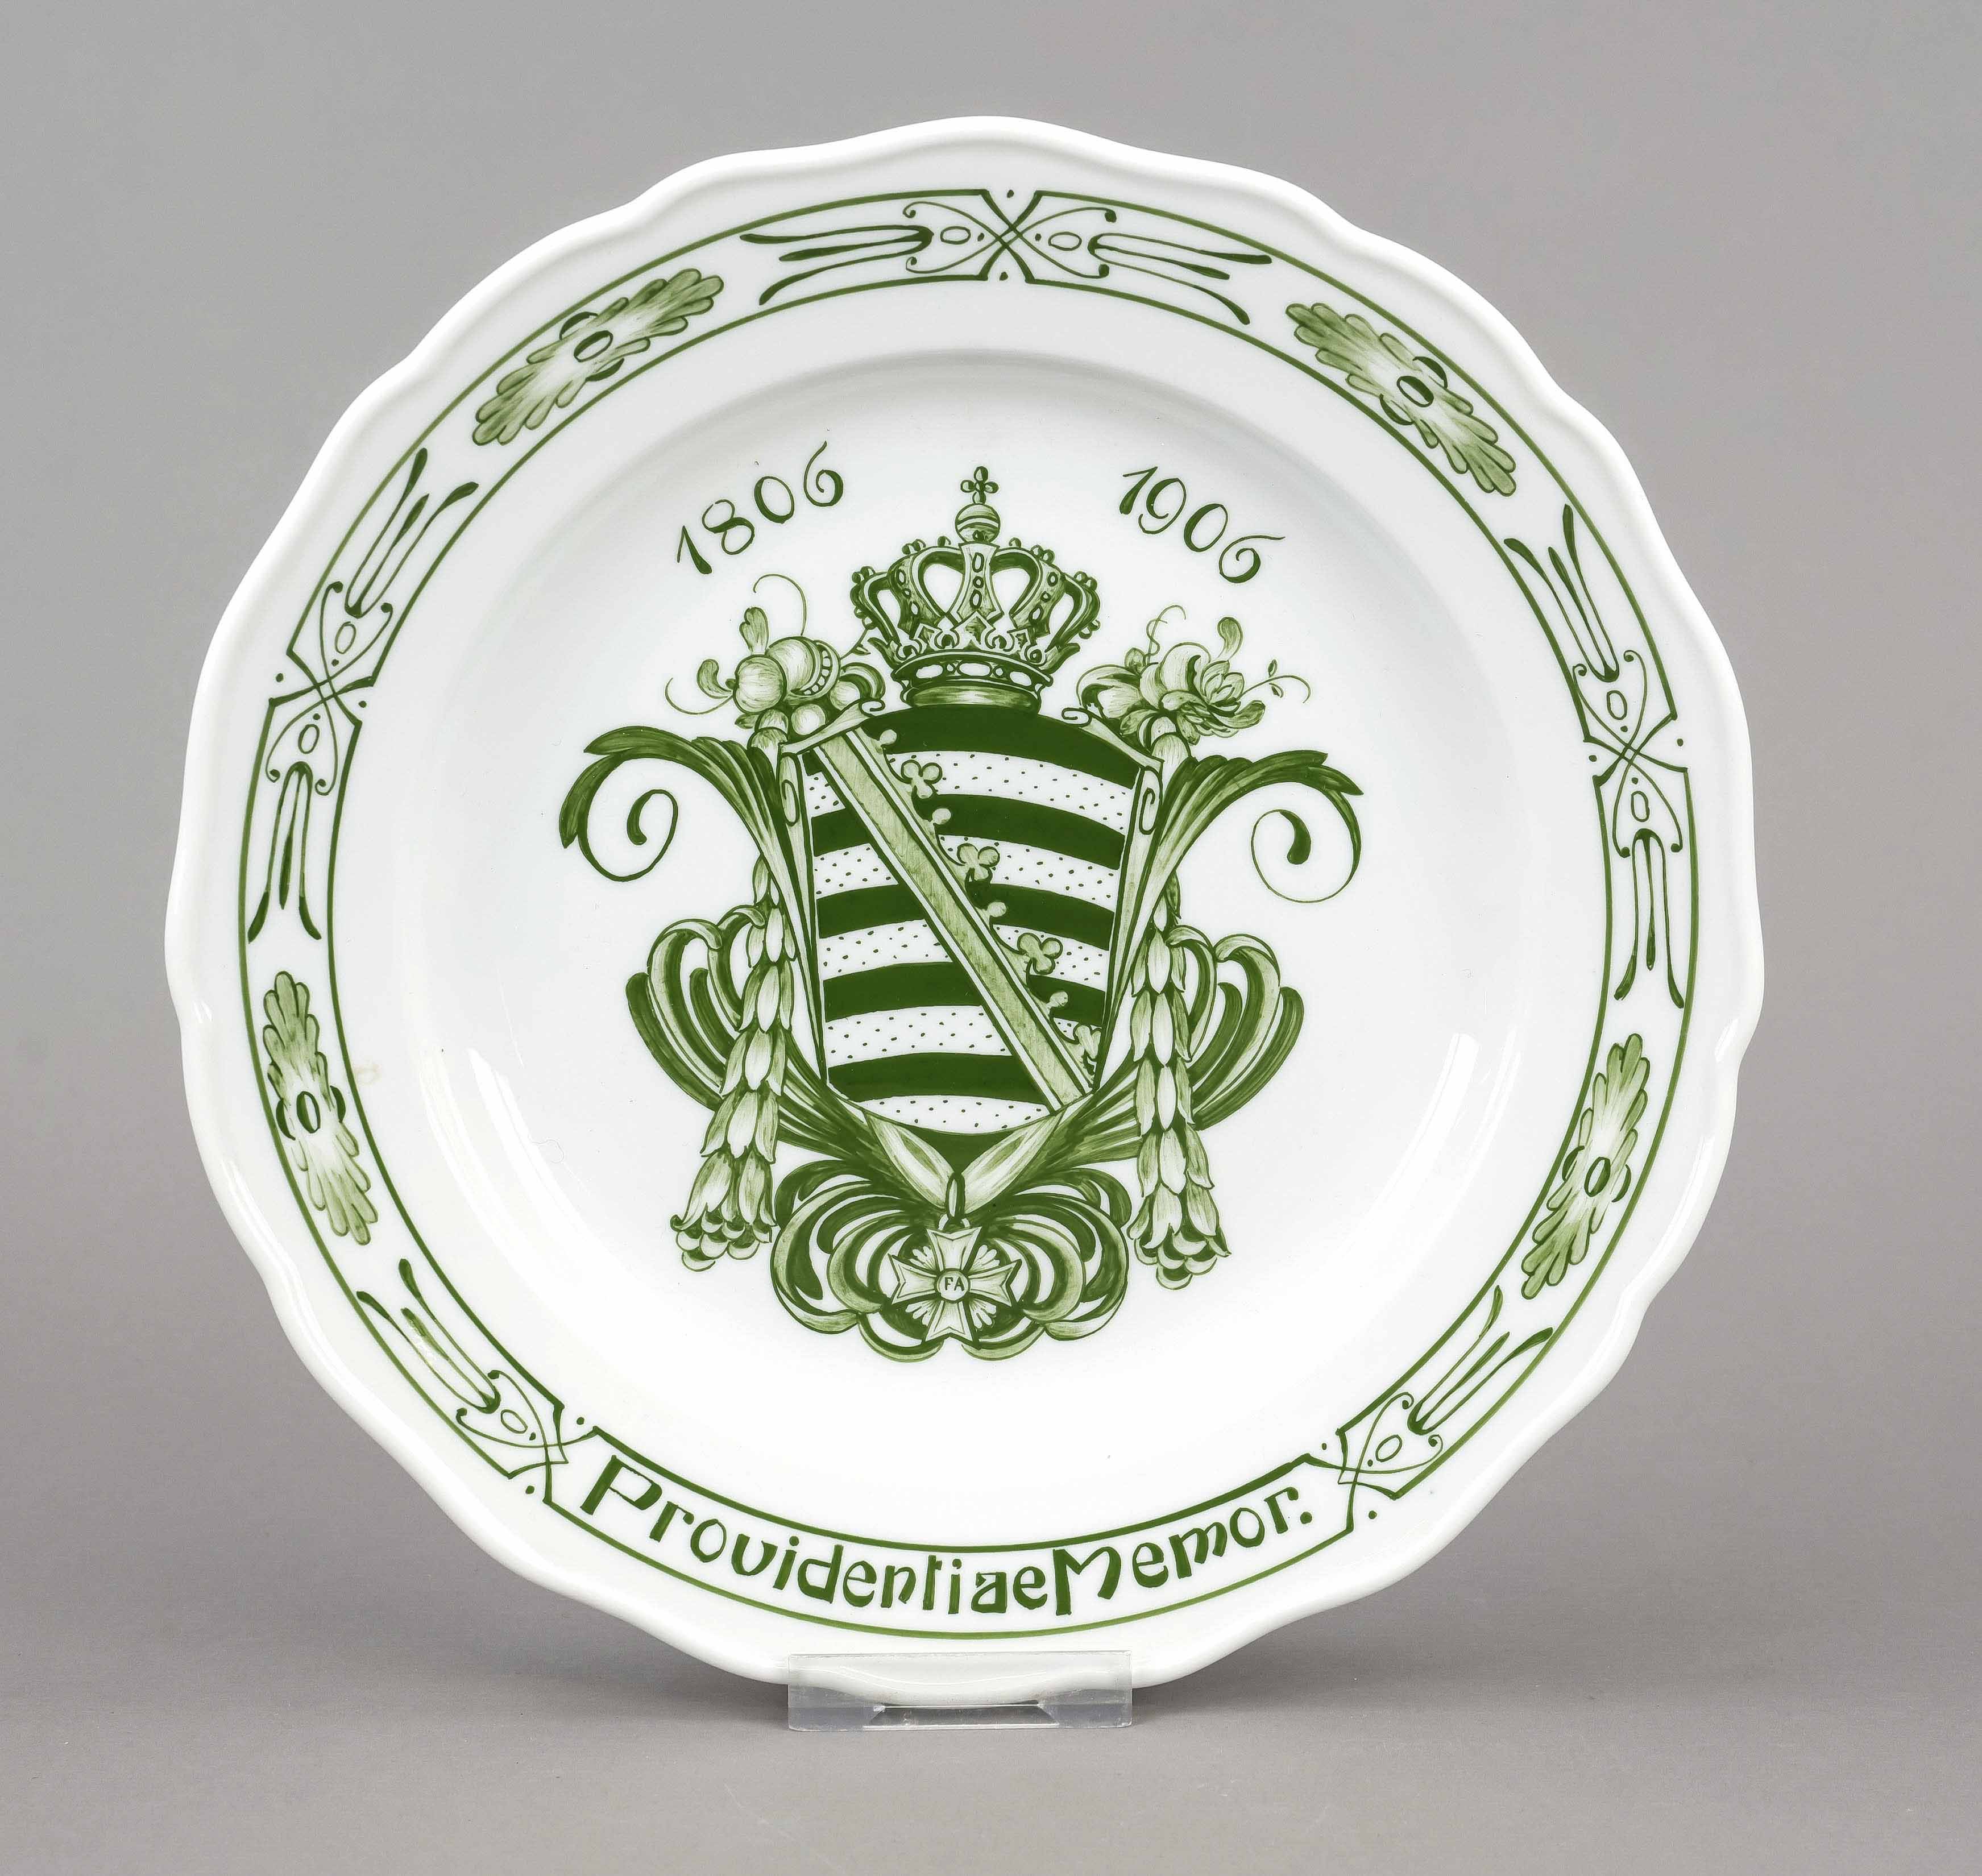 Anniversary plate, Meissen, Knauf period (1850-1924), 2nd choice, with green coat of arms